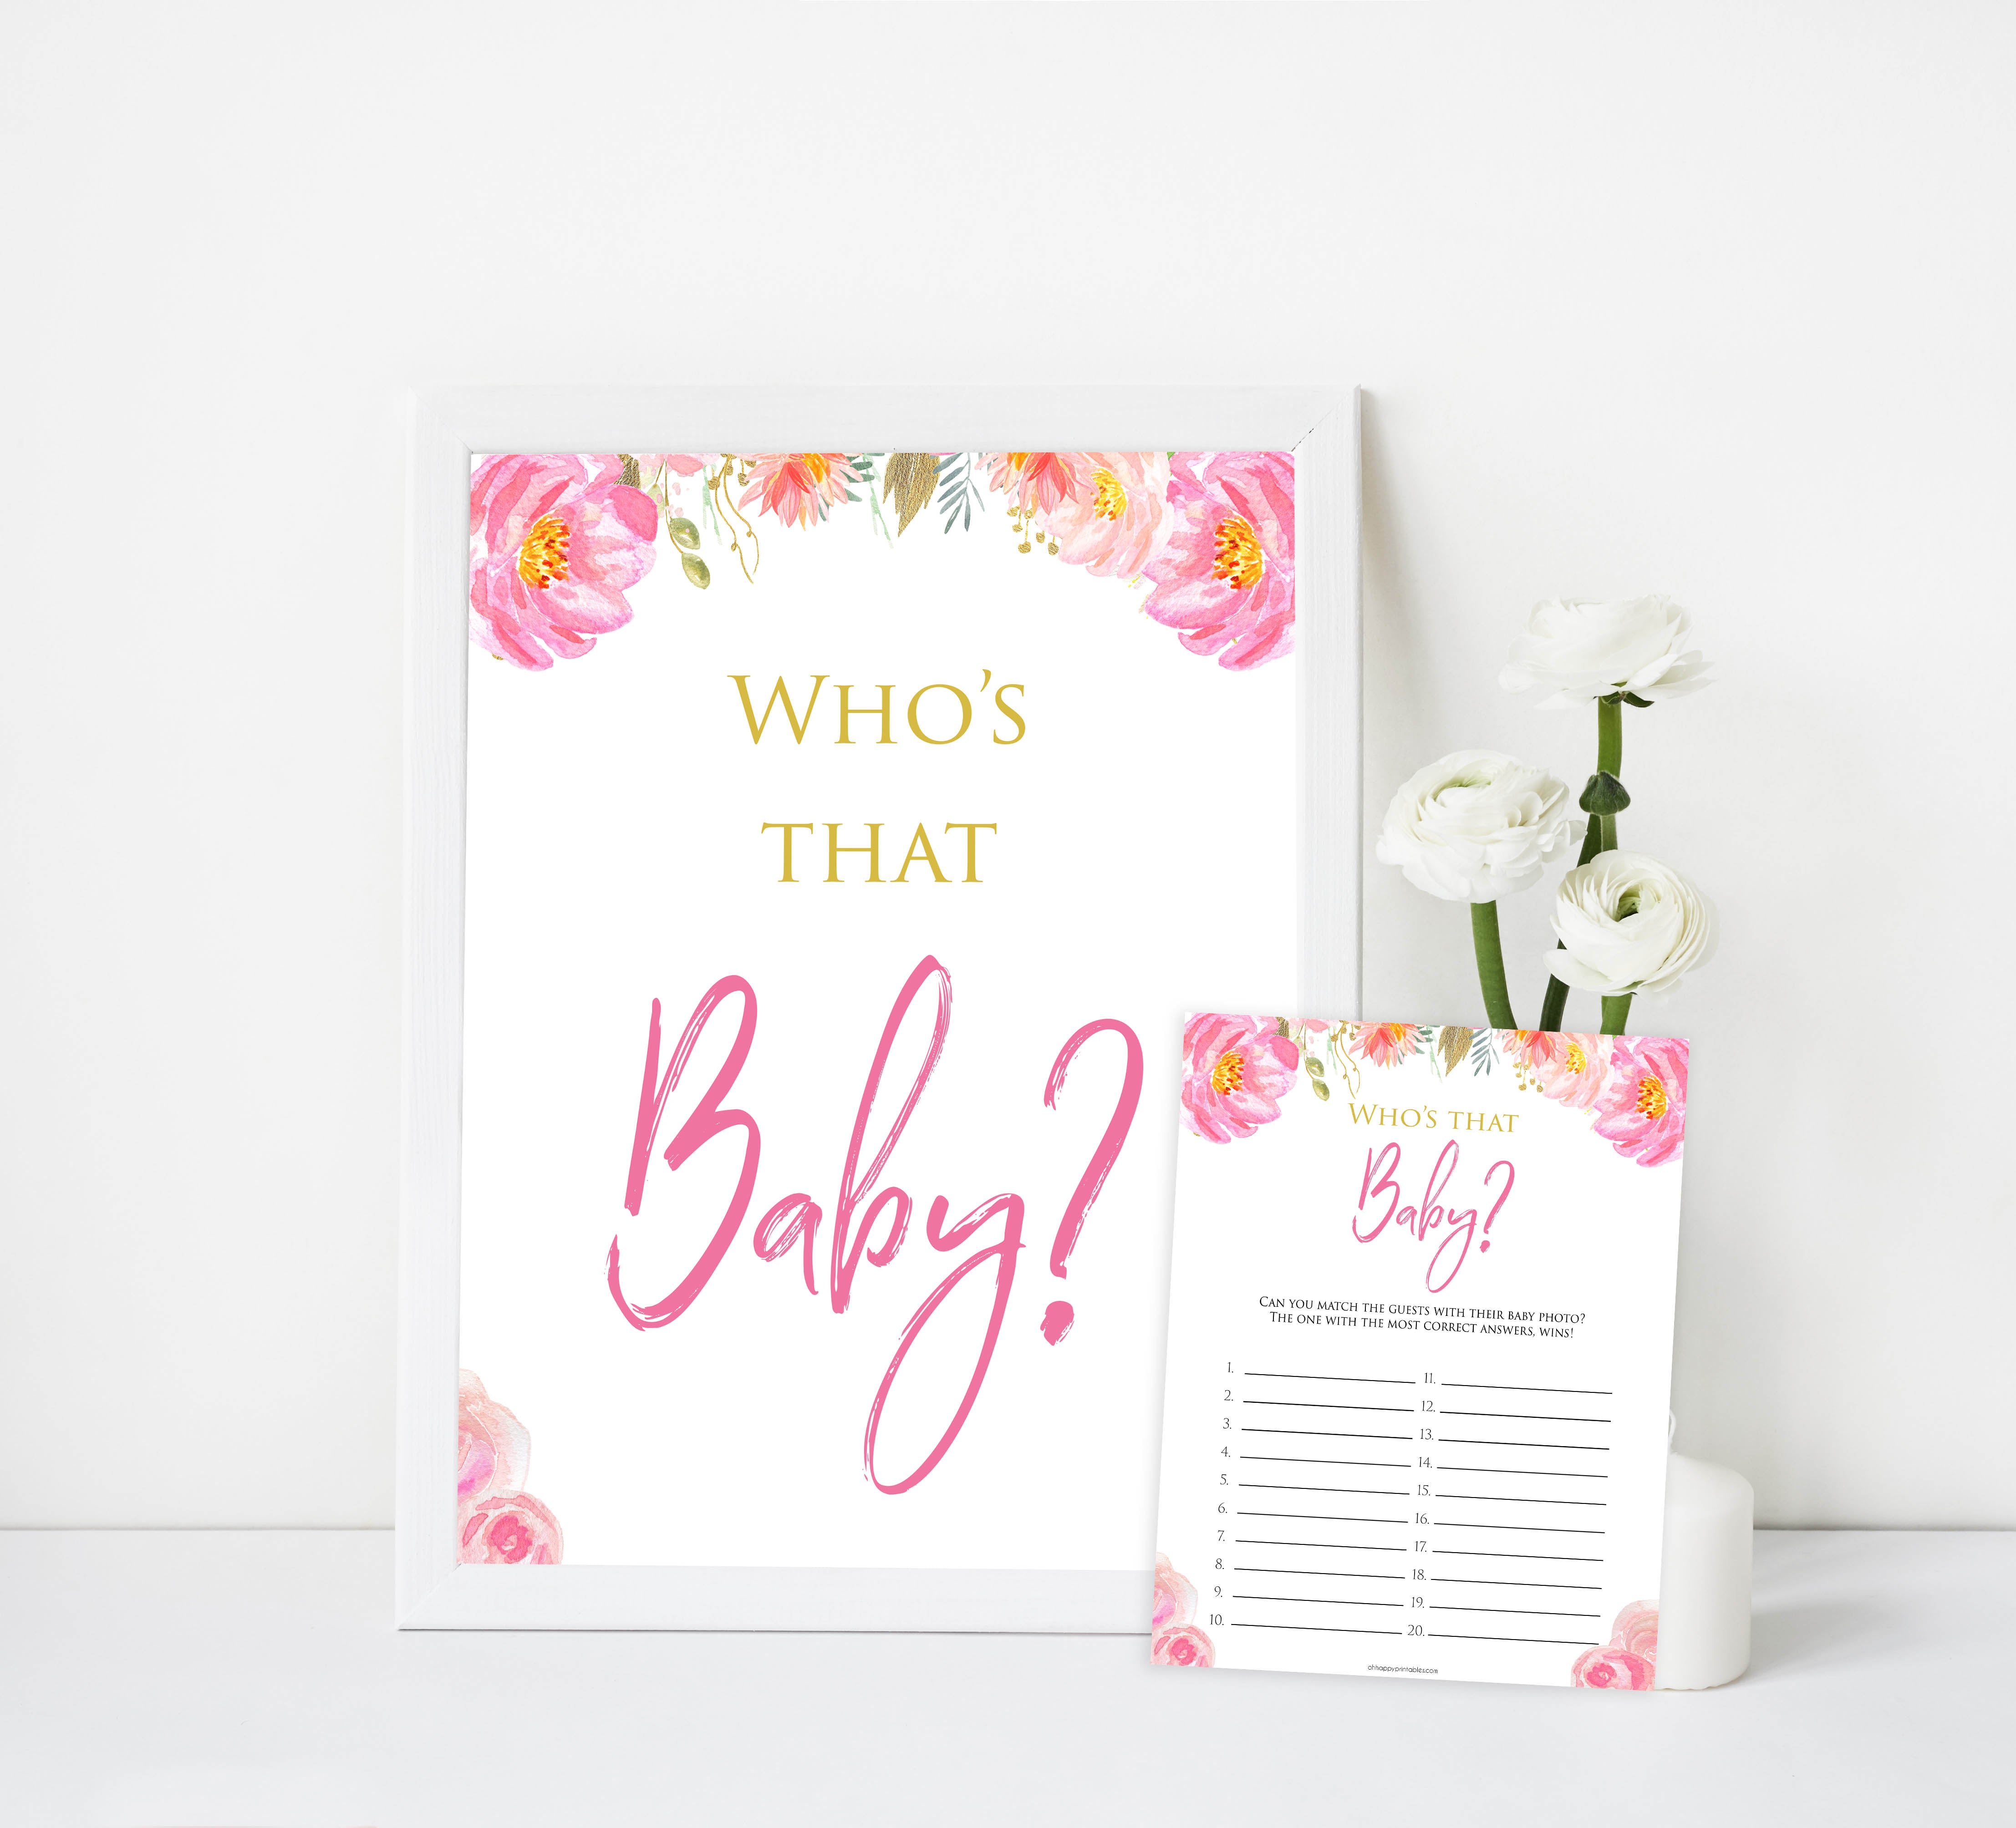 whos that baby game, guess the baby photo game, Printable baby shower games, blush floral fun baby games, baby shower games, fun baby shower ideas, top baby shower ideas, blush baby shower, blue baby shower ideas